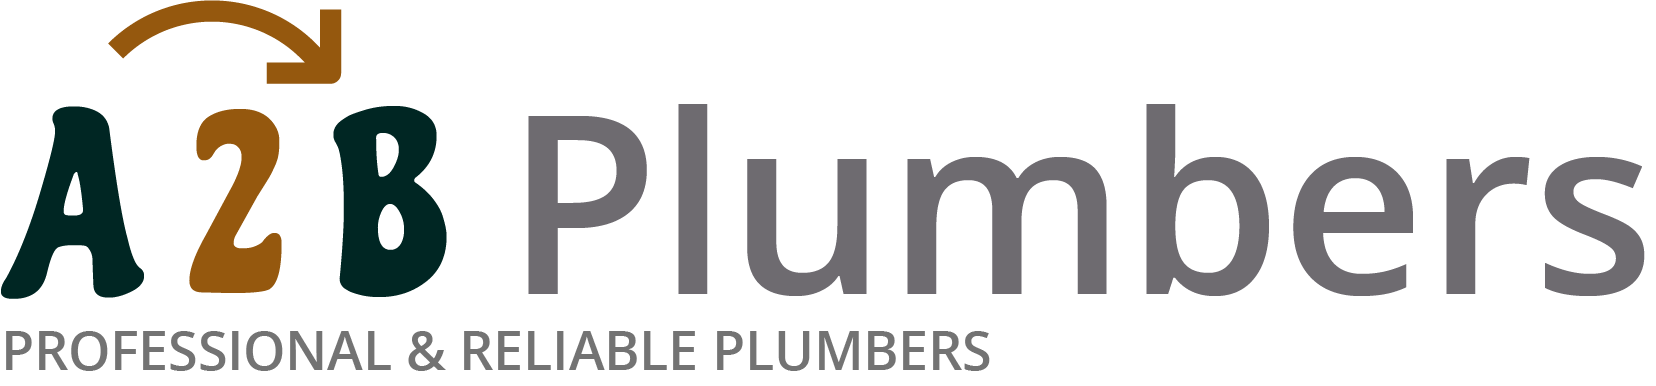 If you need a boiler installed, a radiator repaired or a leaking tap fixed, call us now - we provide services for properties in Ludlow and the local area.